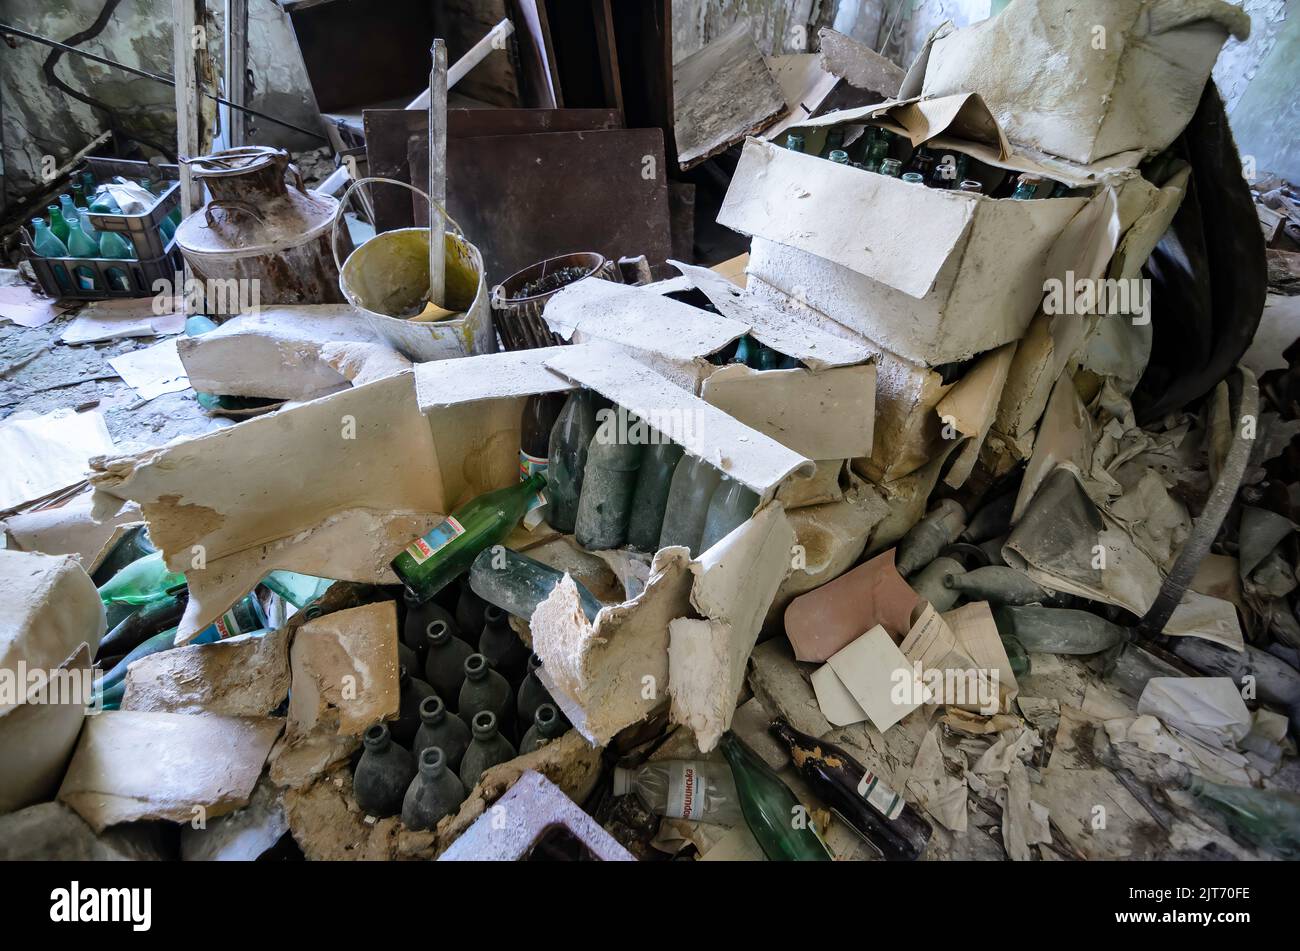 Details of the Chernobyl fire station left right after the disaster. Old empty bottles in boxes in the foreground Stock Photo